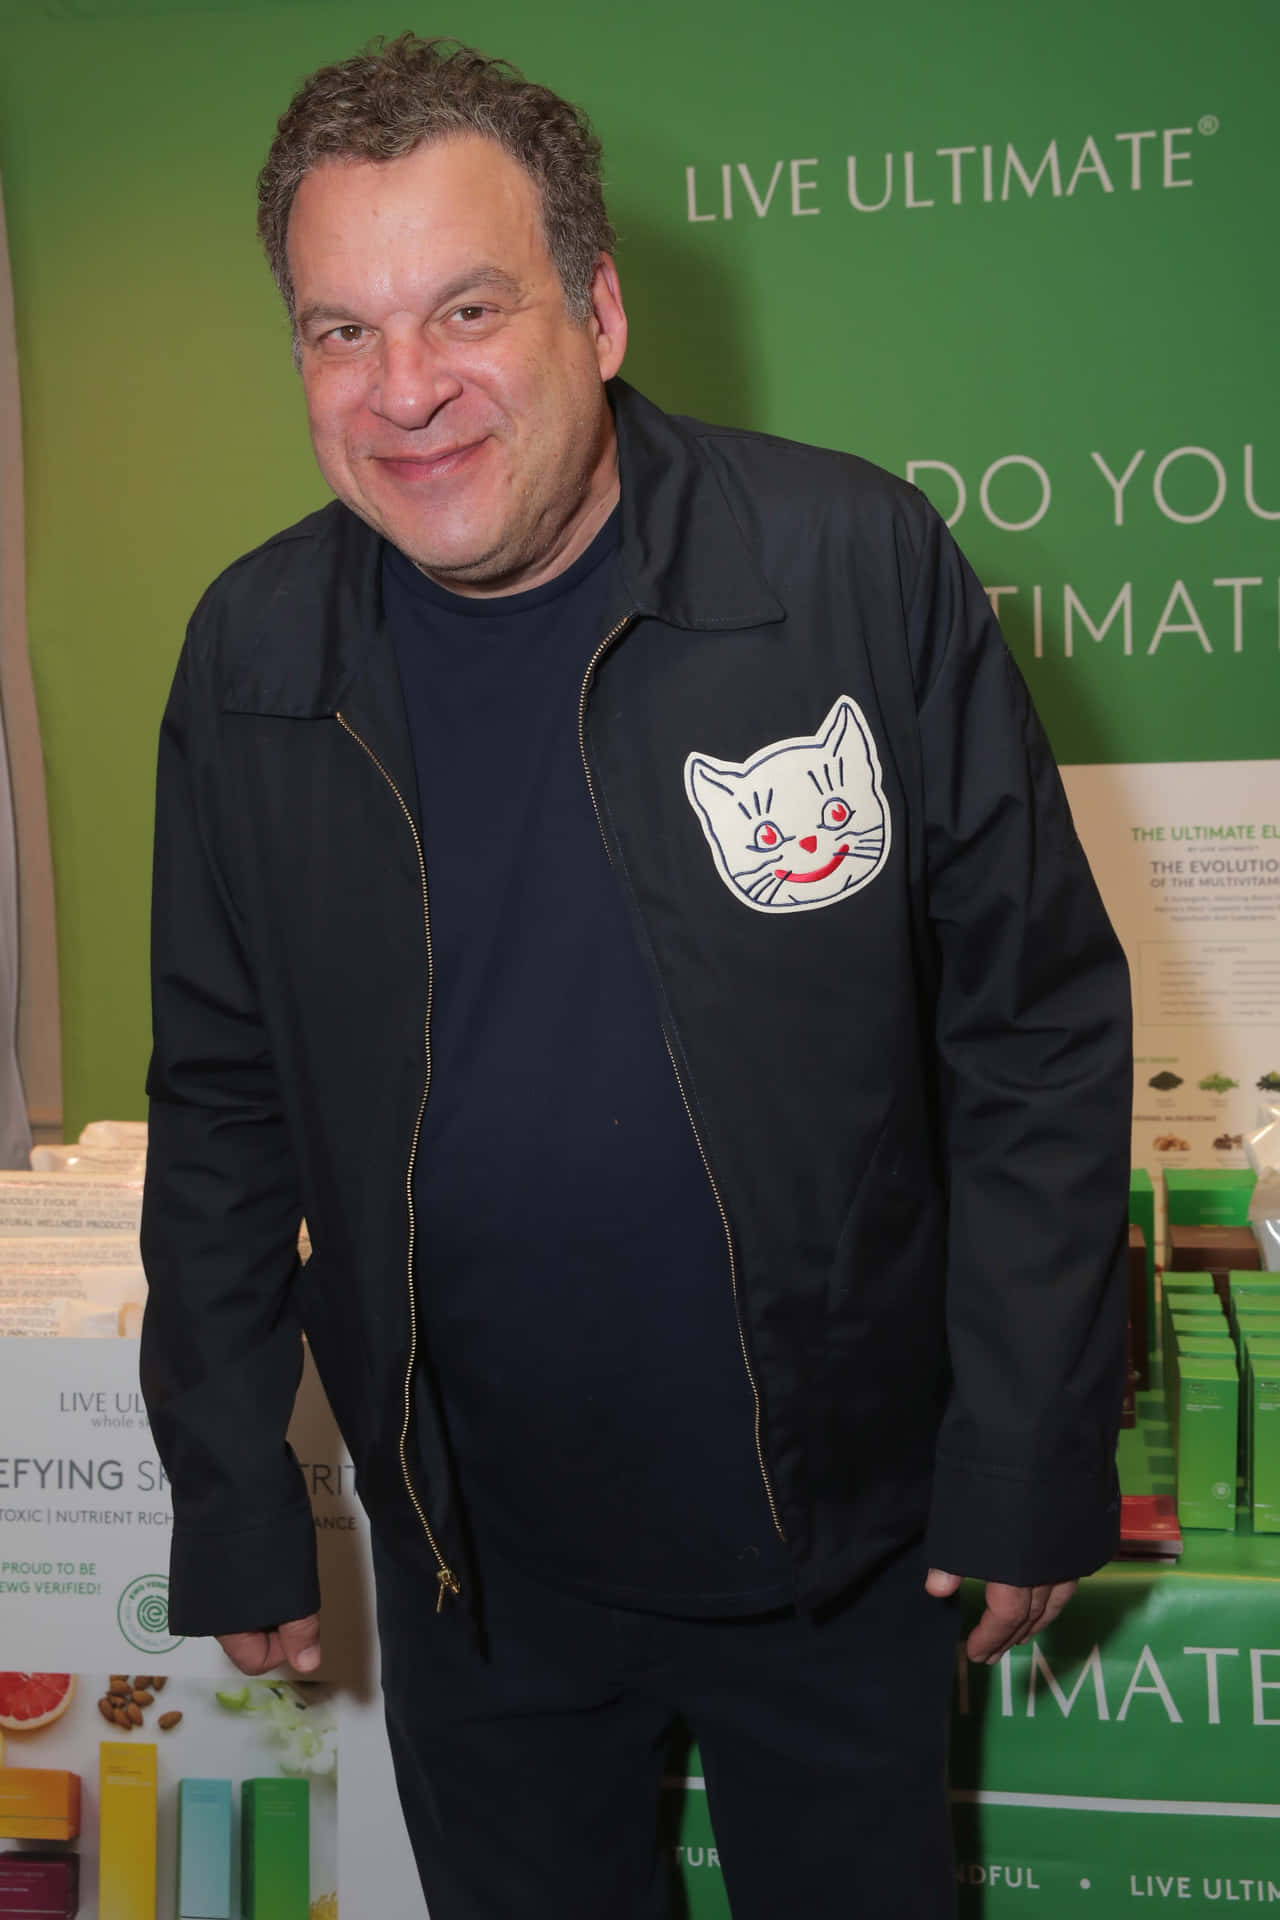 Jeffgarlin Is An American Comedian, Actor, And Producer. He Is Best Known For His Role As Jeff Greene On The Hbo Show 